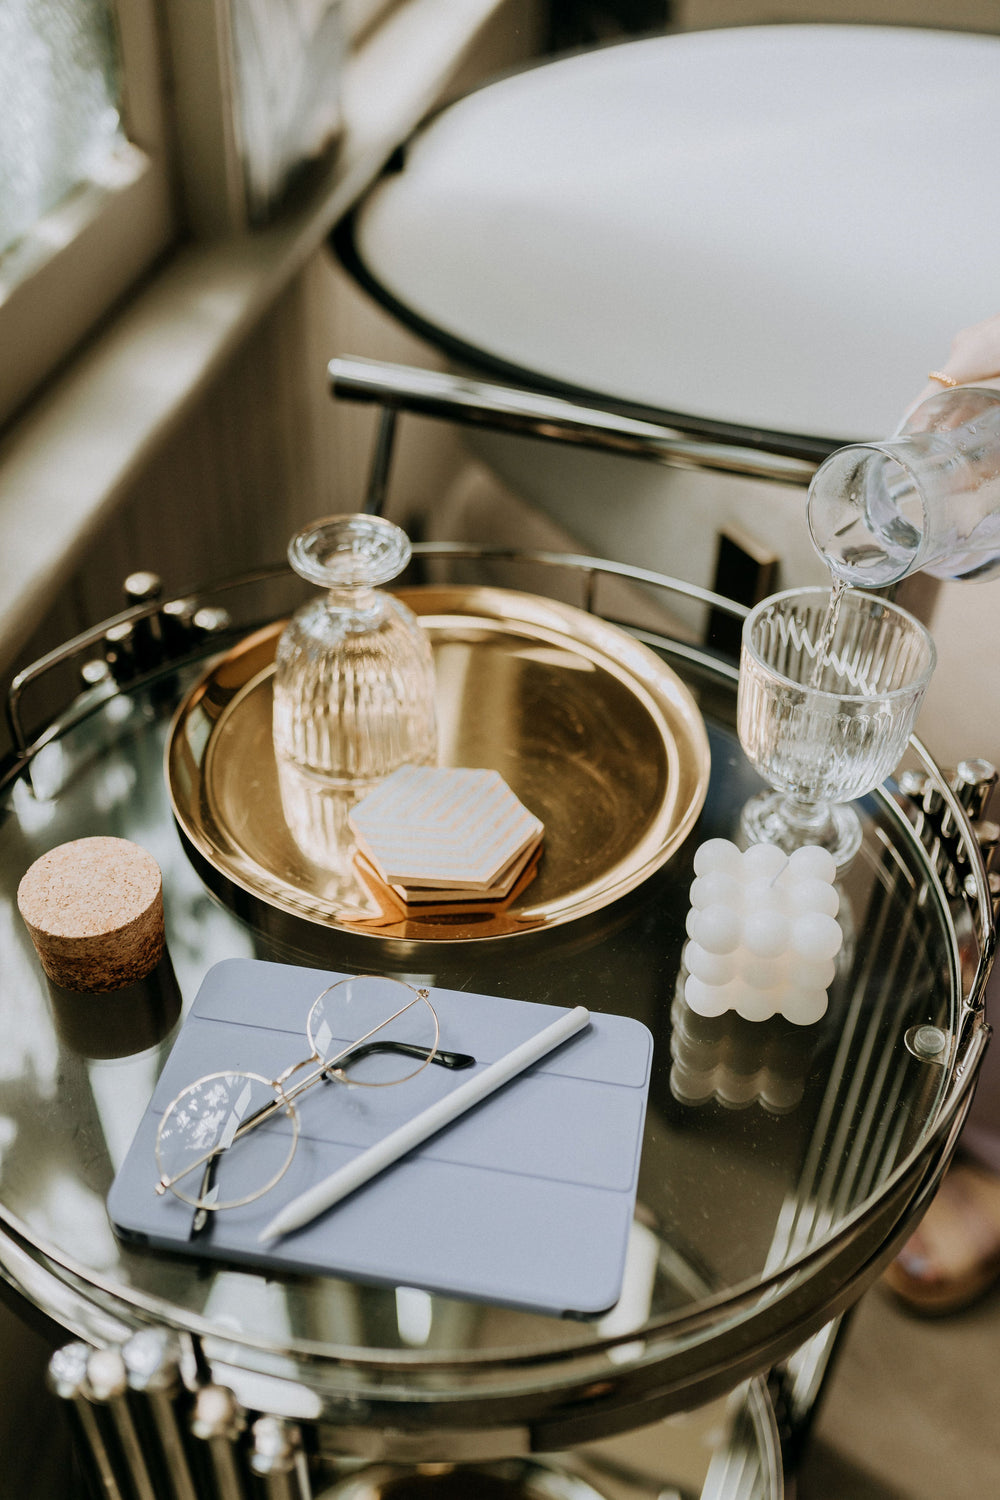 A purple iPad mini, an Apple Pencil, and vintage circular glasses are sitting on a modern bar cart. Off to the side, someone is pouring water into a glass.